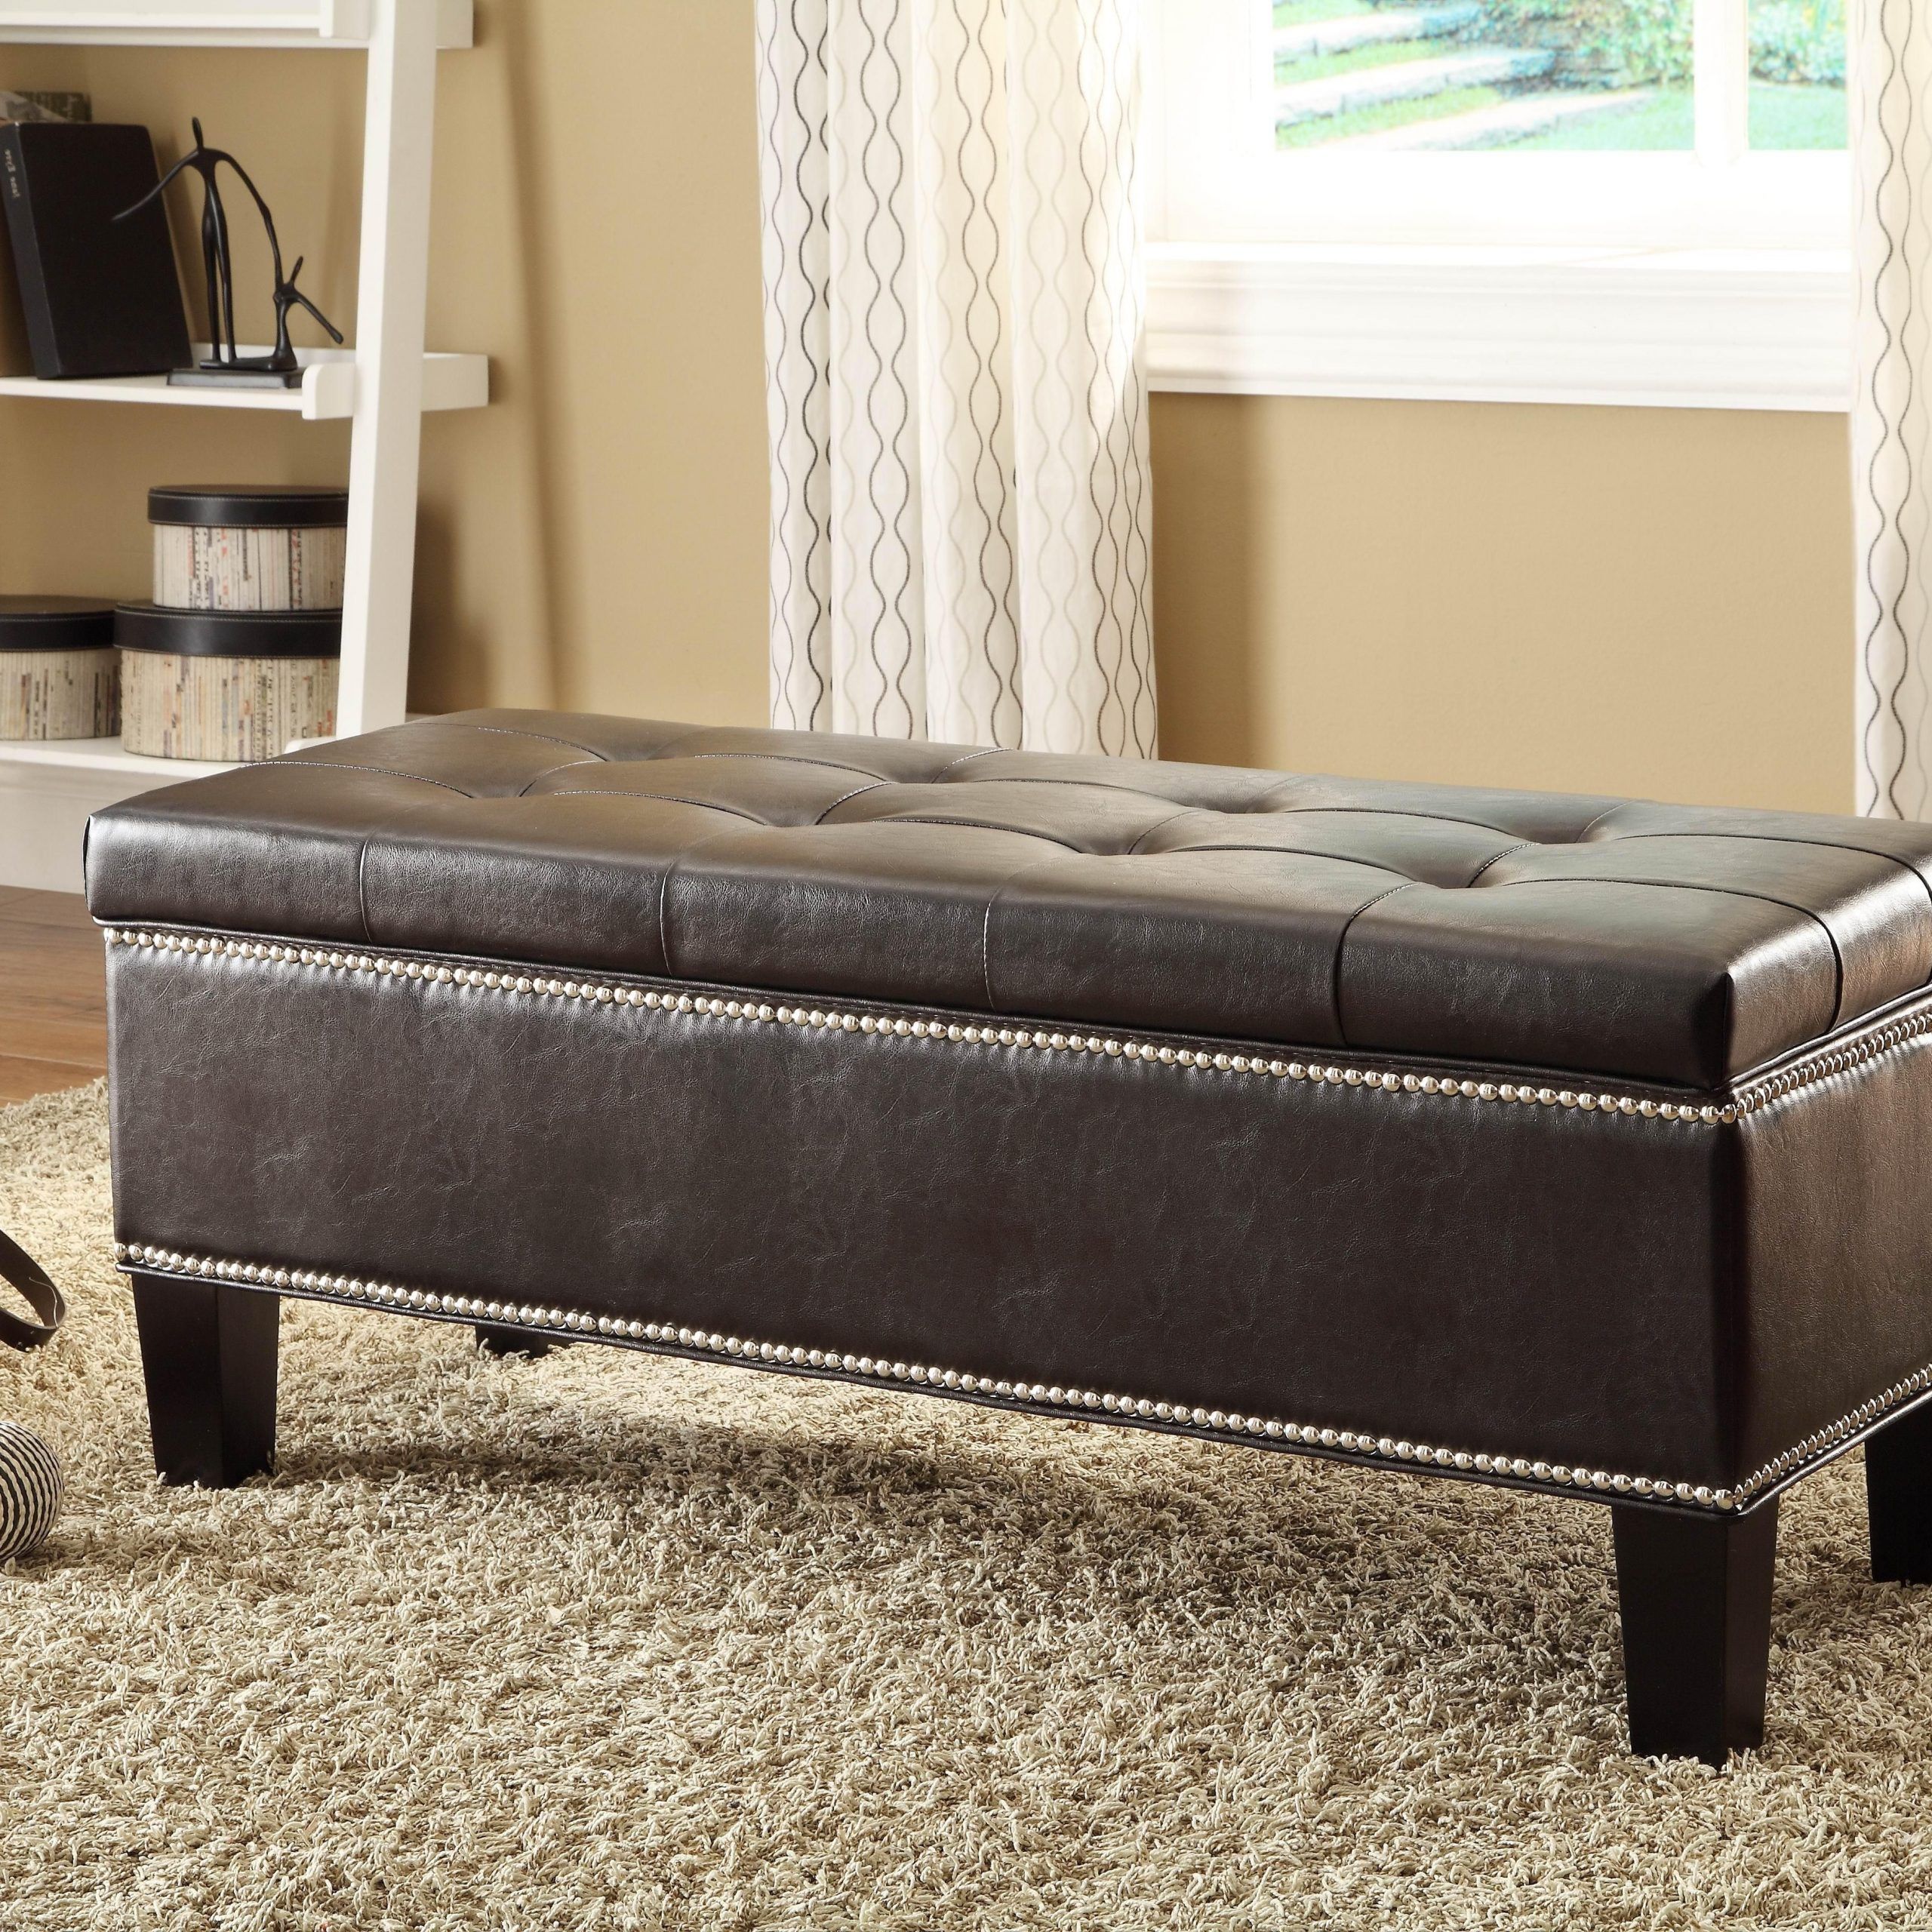 Gray And Brown Stripes Cylinder Pouf Ottomans Pertaining To Latest Black Bedroom Storage Bench – Home Designing (View 3 of 10)